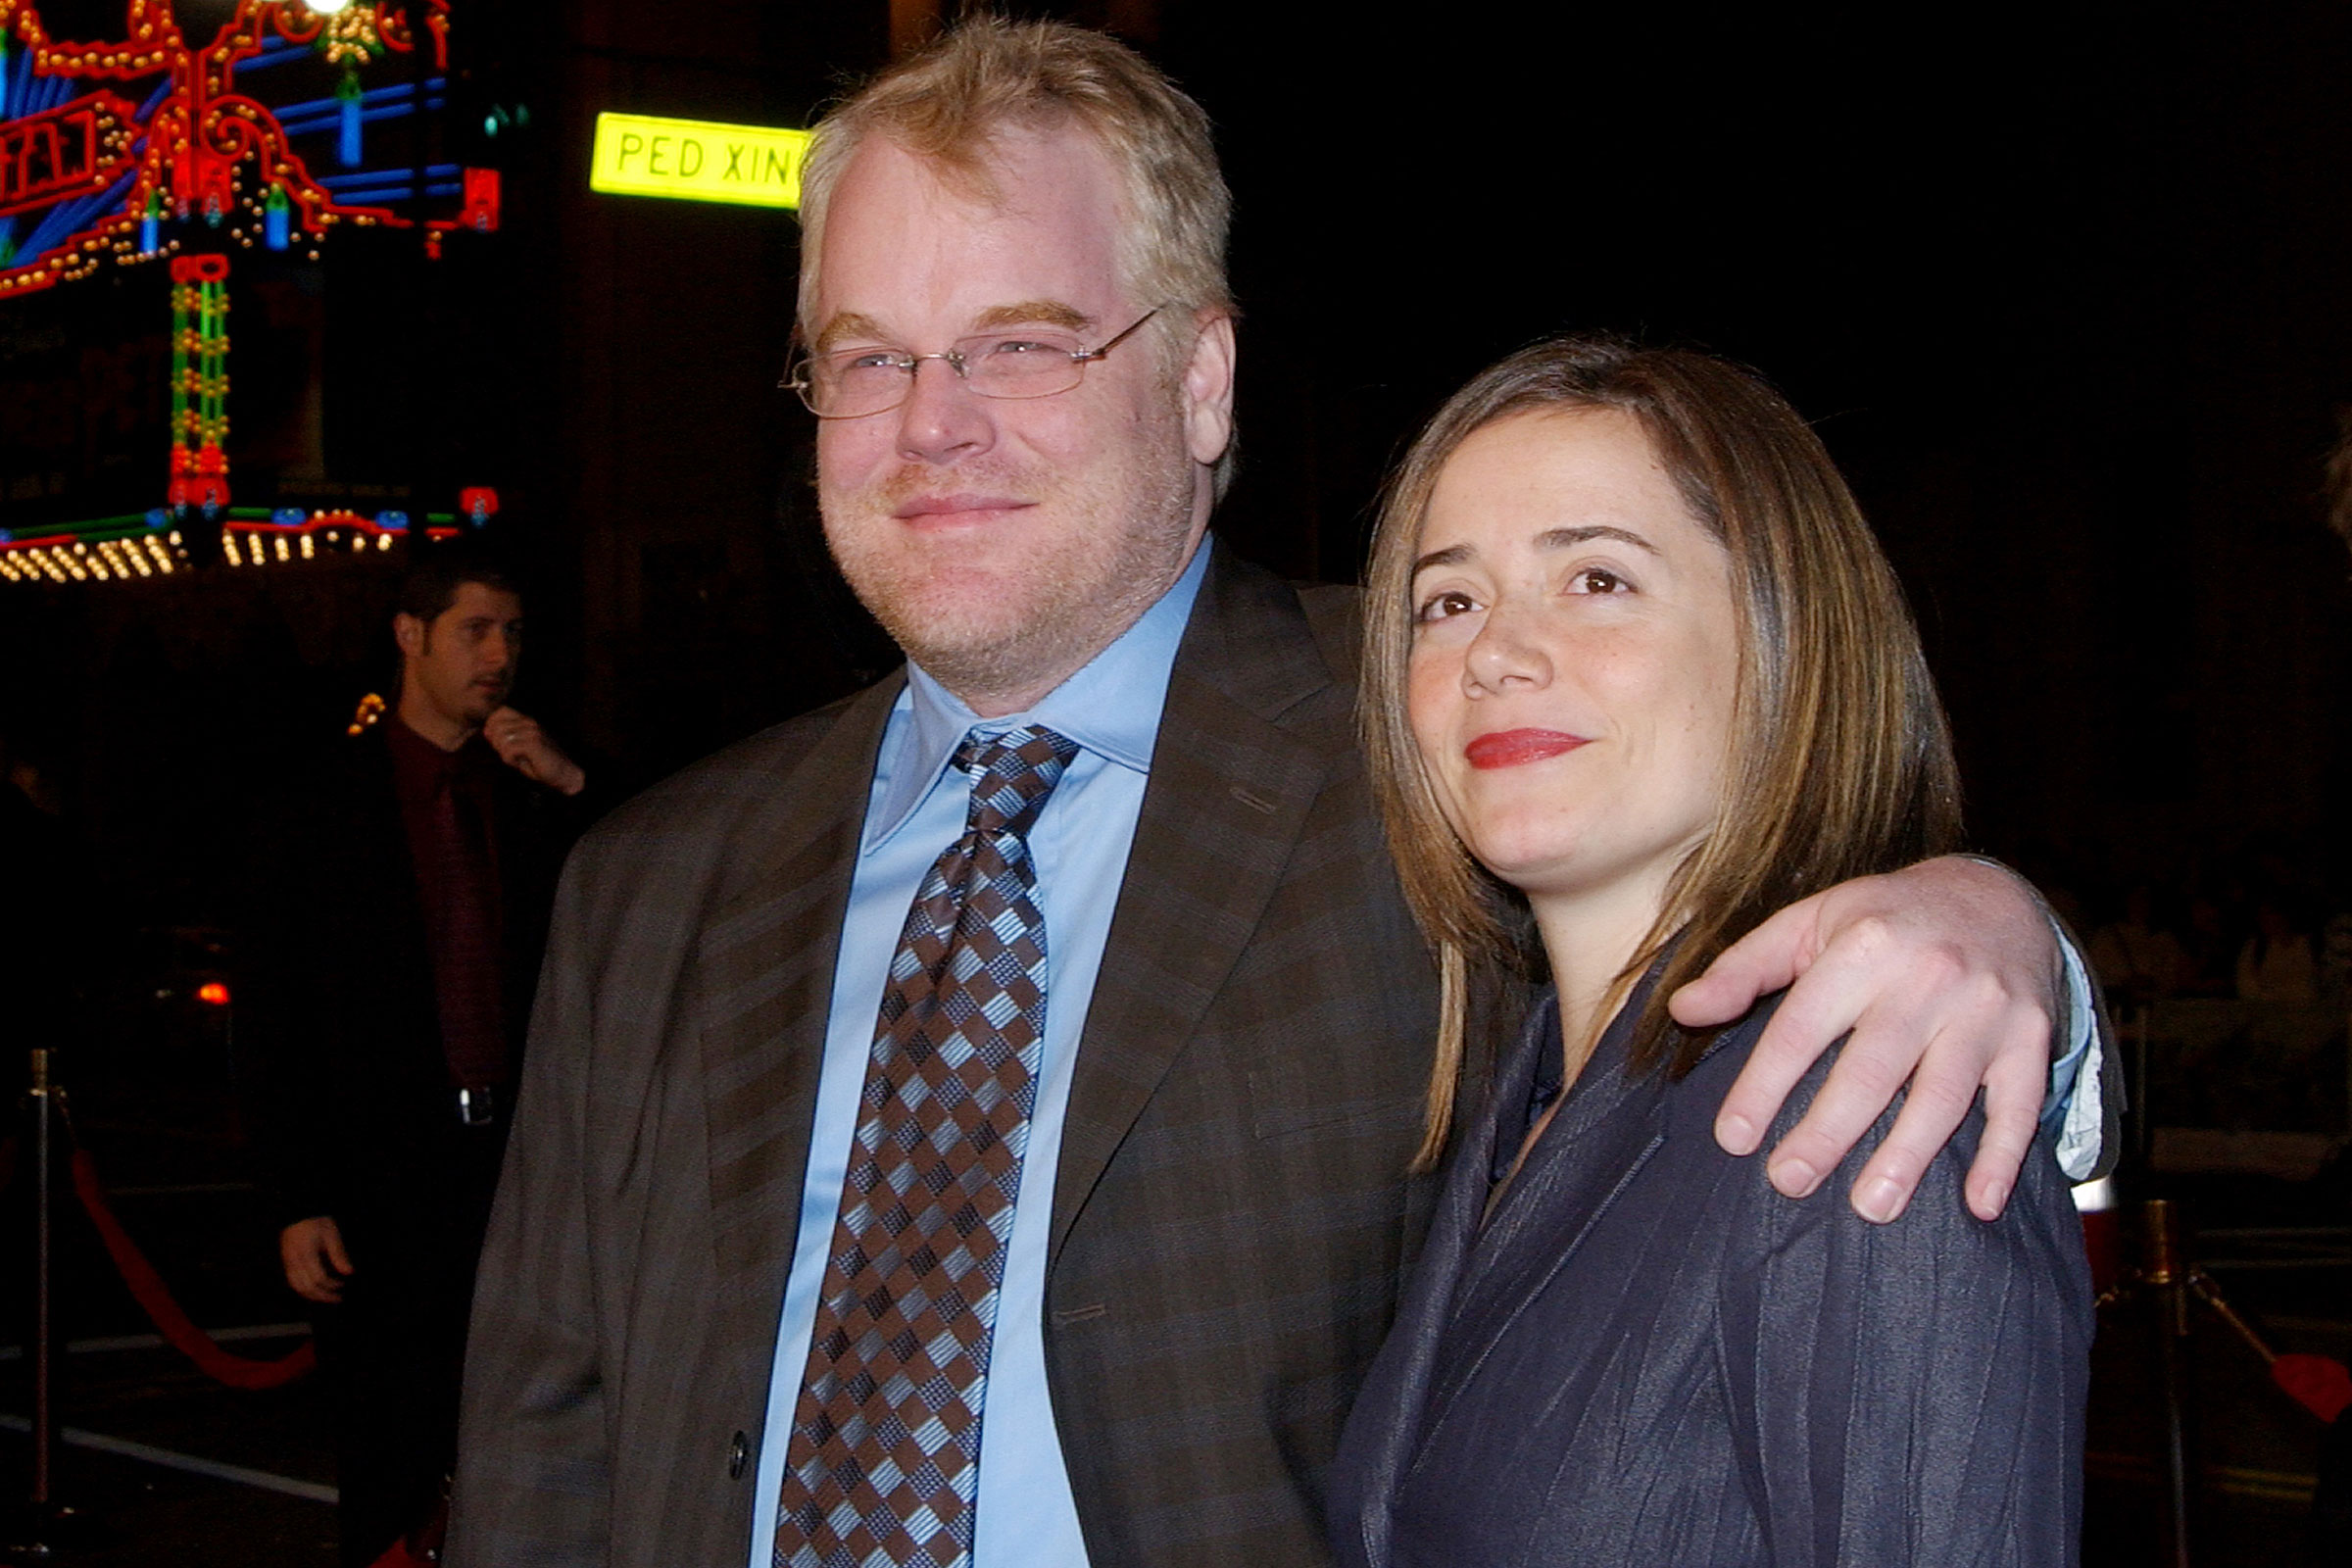 Philip Seymour Hoffman and Mimi O'Donnell at a premiere at Mann's Chinese Theater in Hollywood, California in 2004. (Jon Kopaloff—Getty Images)